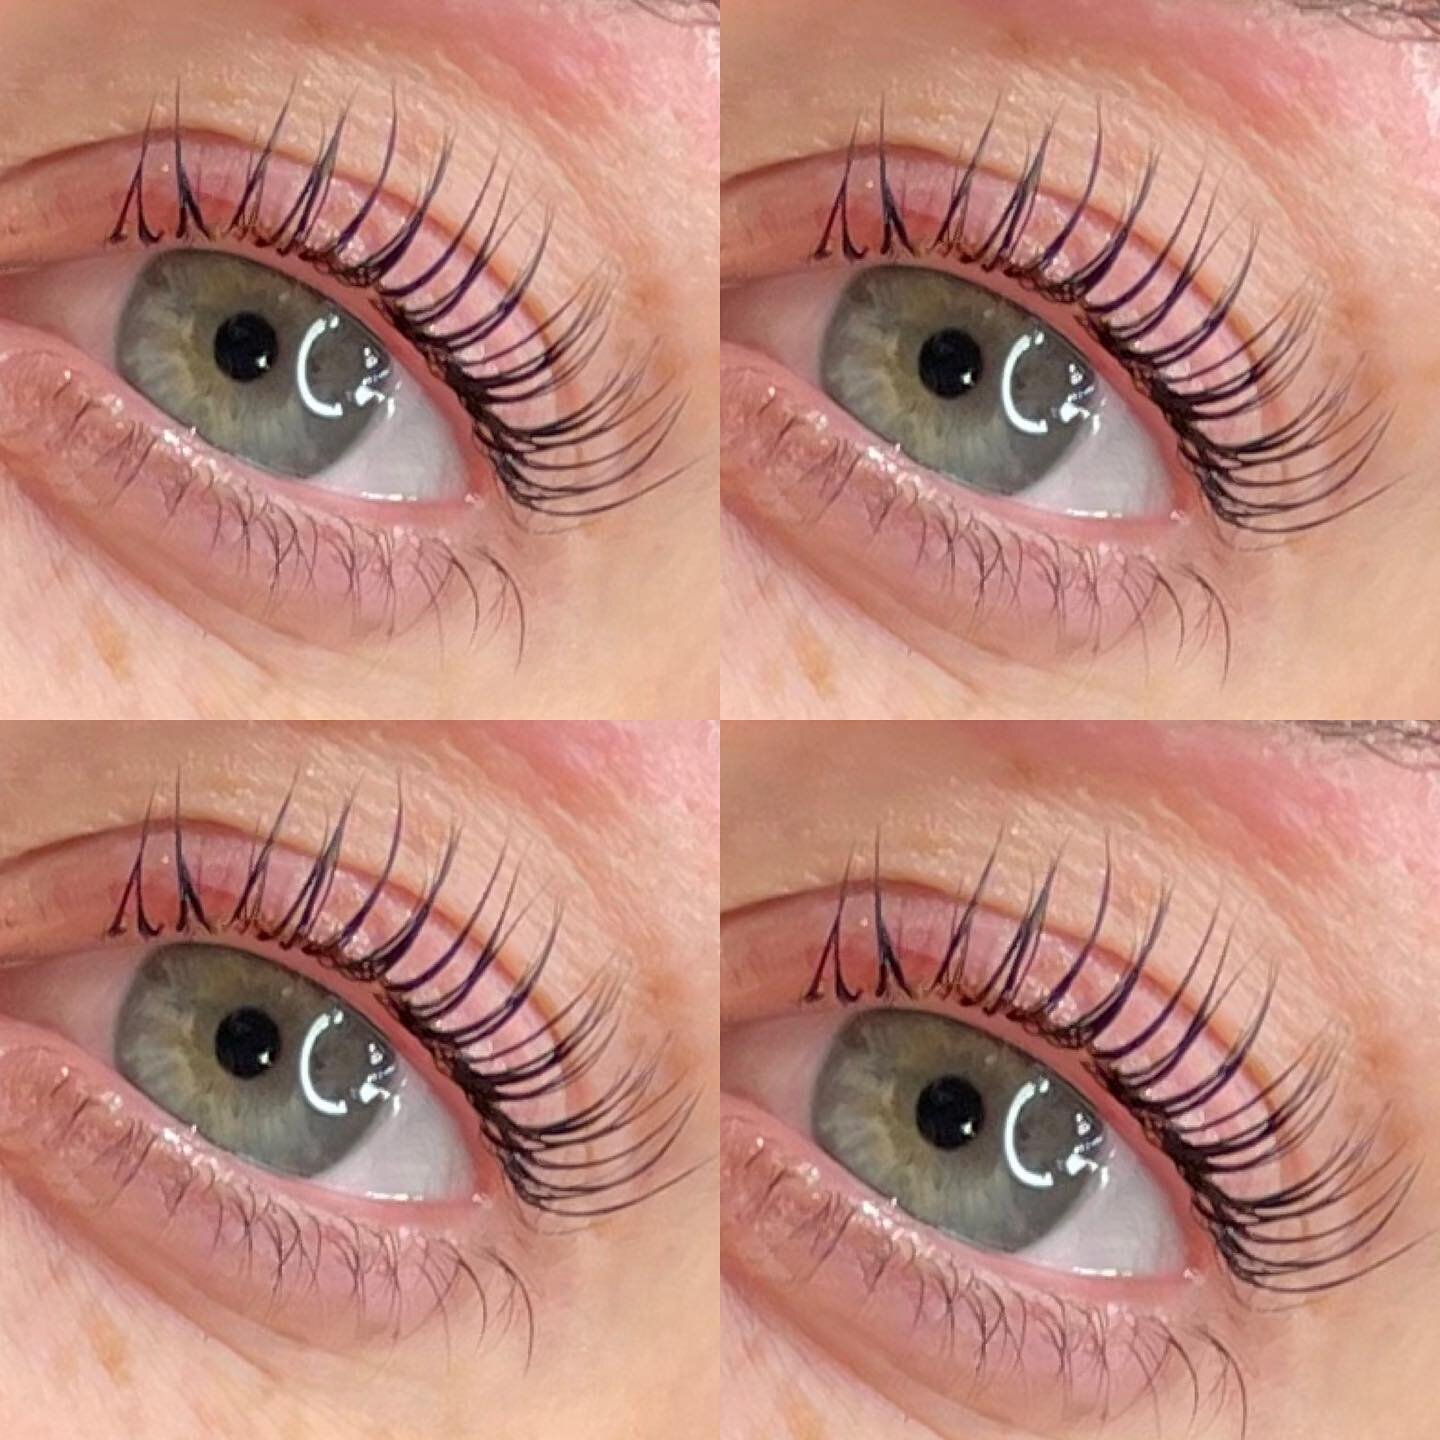 𝙇𝙖𝙨𝙝𝙚𝙨.  𝙇𝙖𝙨𝙝𝙚𝙨. 𝙇𝙖𝙨𝙝𝙚𝙨. 

Anyone else got serious lash envy? 

Such a beautiful result from my clients first LvL with me. Im always amazed at the results this treatment gives 🔥 

𝘈𝘯𝘺 𝘣𝘰𝘰𝘬𝘪𝘯𝘨𝘴 𝘮𝘢𝘥𝘦 𝘵𝘩𝘪𝘴 𝘮𝘰𝘯𝘵?